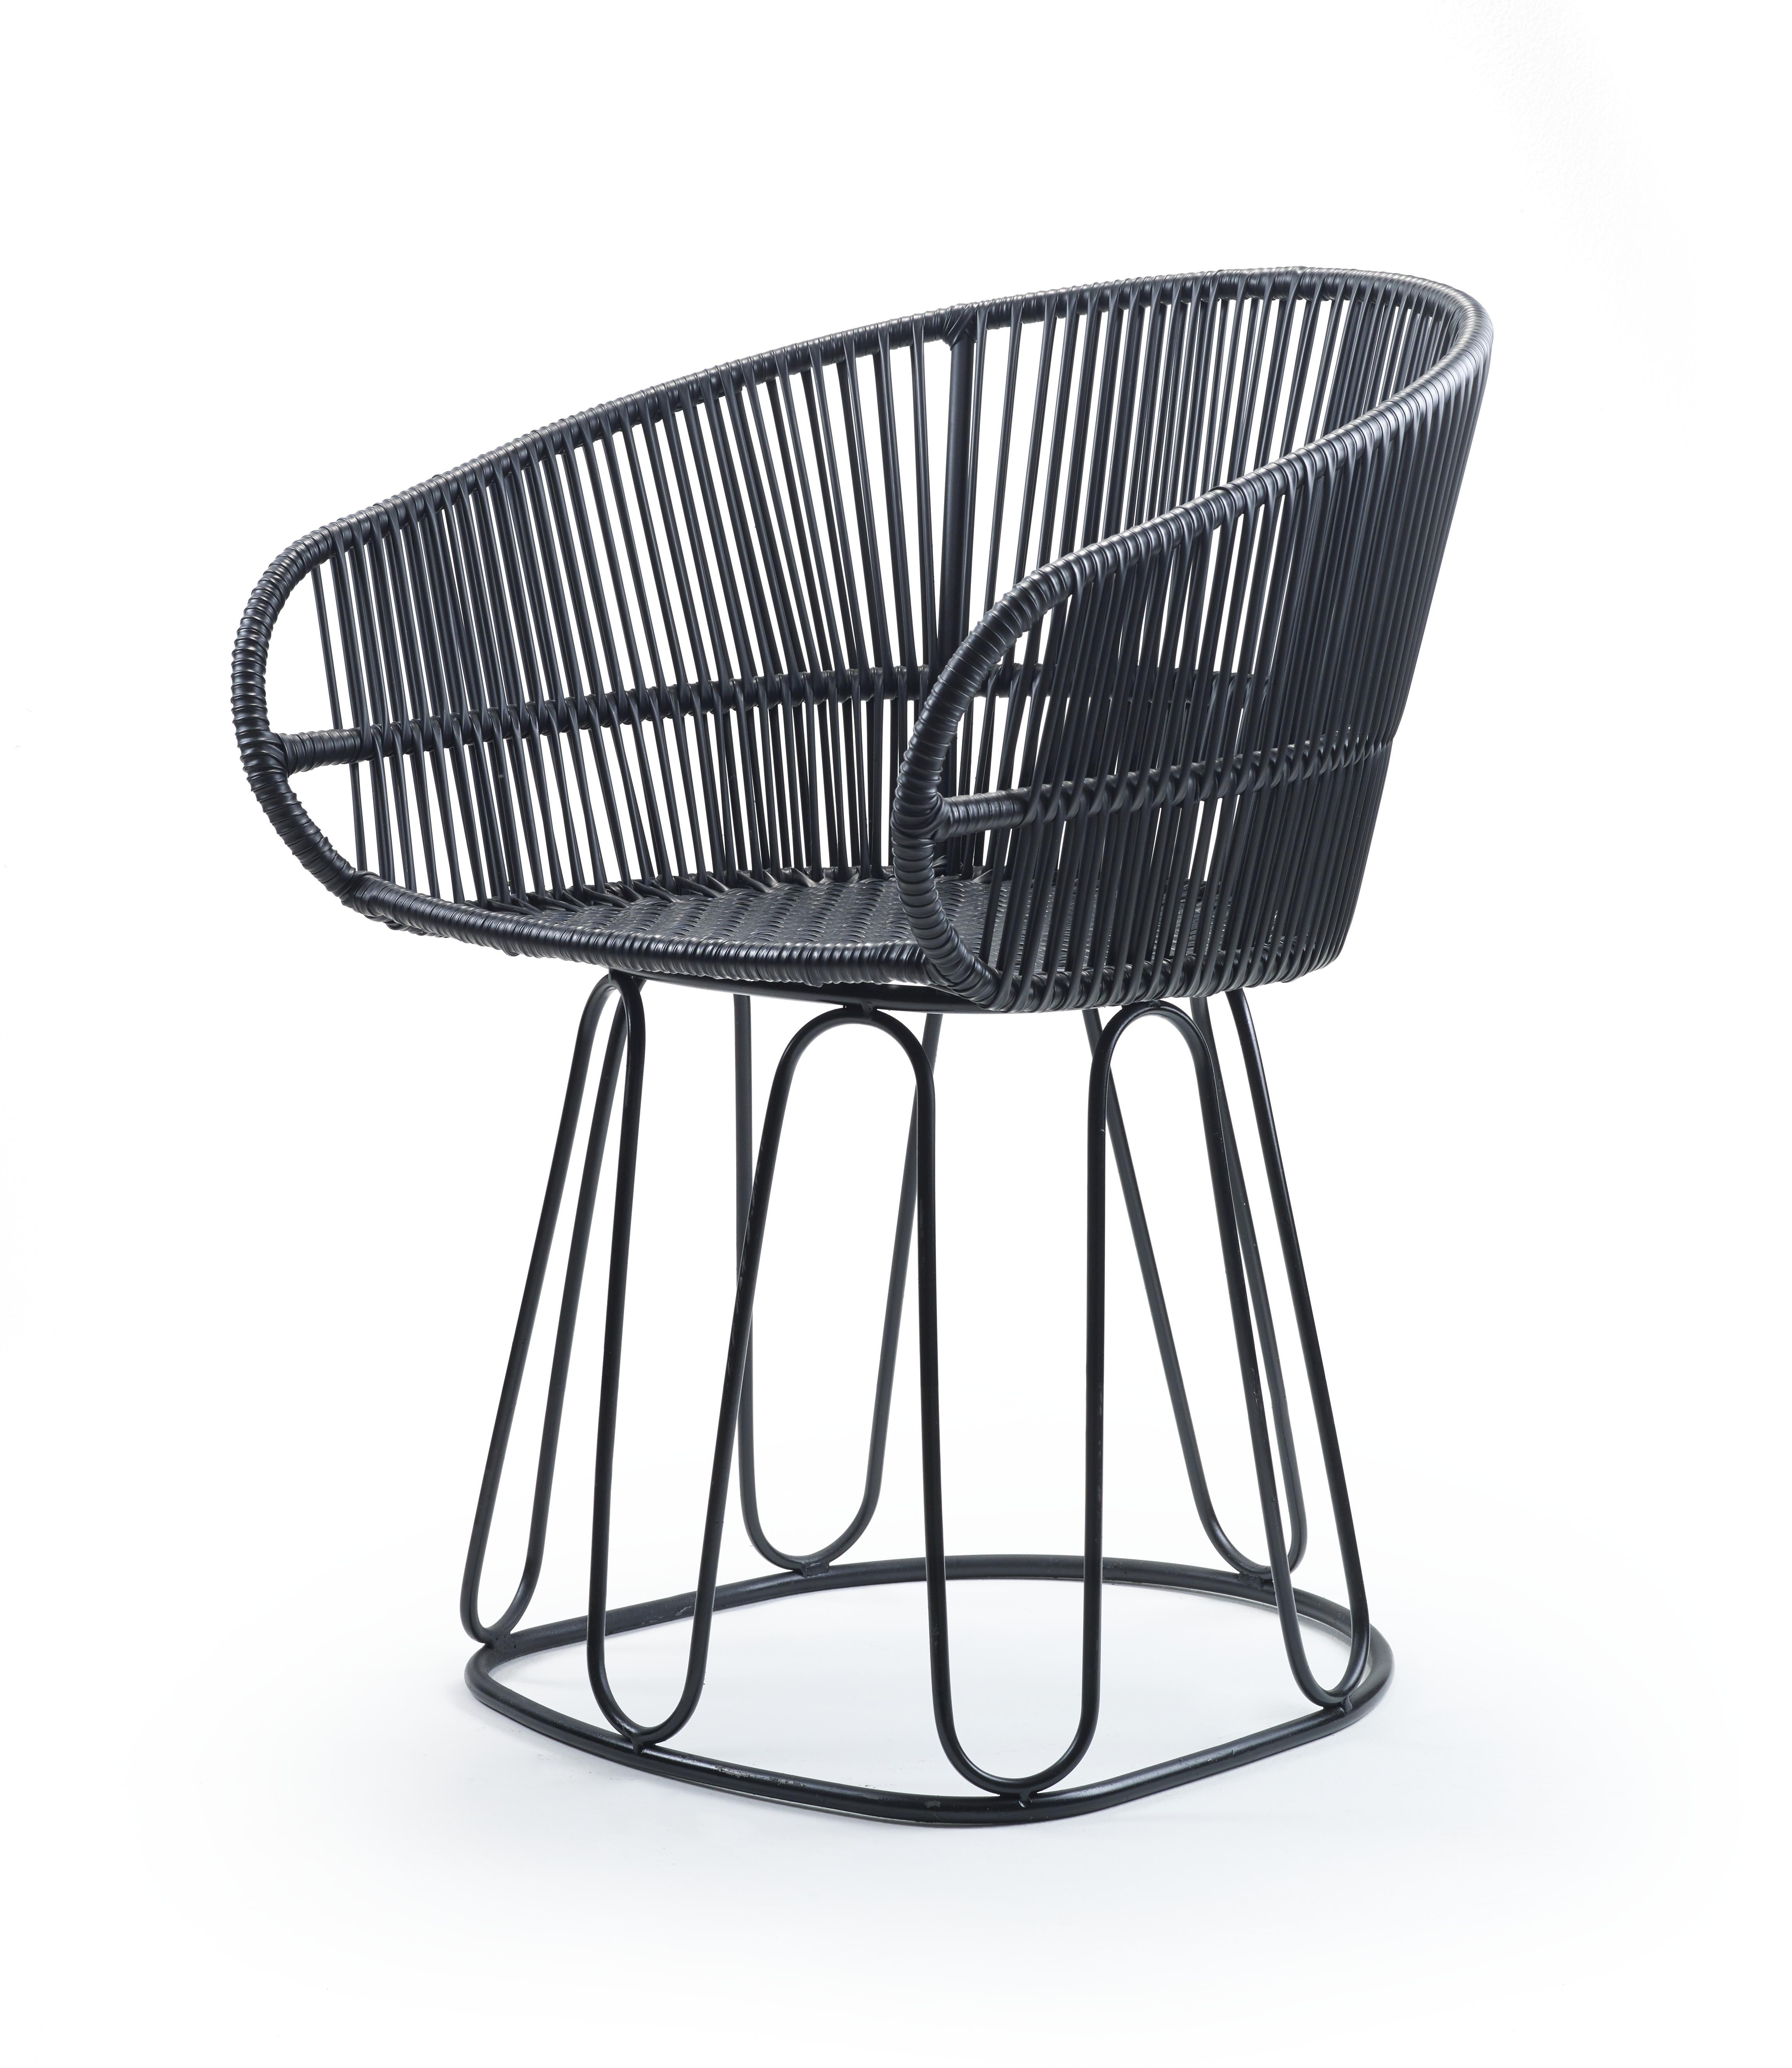 Black circo dining chair by Sebastian Herkner
Materials: Galvanized and powder-coated tubular steel. PVC strings.
Technique: Made from recycled plastic. Weaved by local craftspeople in Colombia. 
Dimensions: W 61.5 x D 56.5 x H 77.5 cm